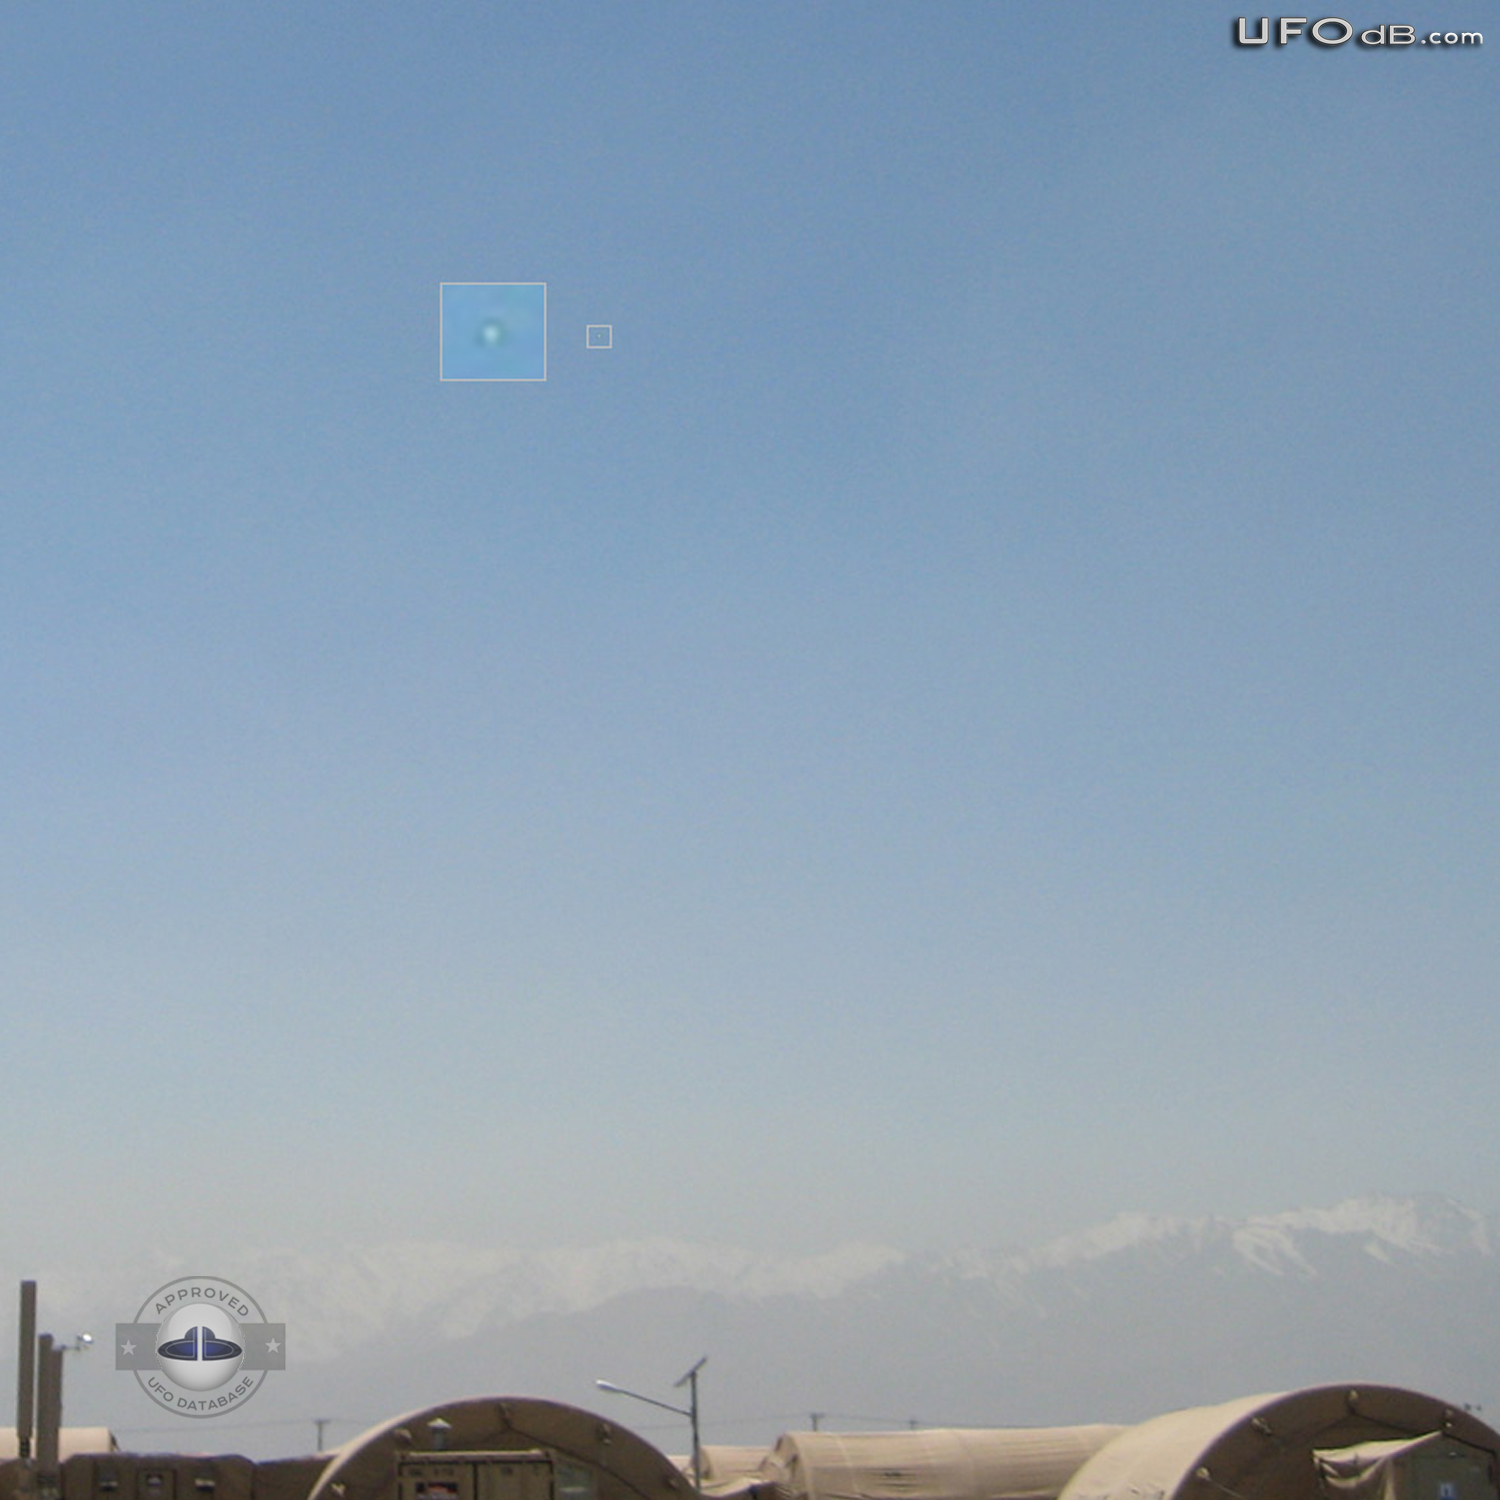 Two Fast Metallic UFOs over the mountains | Afghanistan | April 4 2011 UFO Picture #269-2